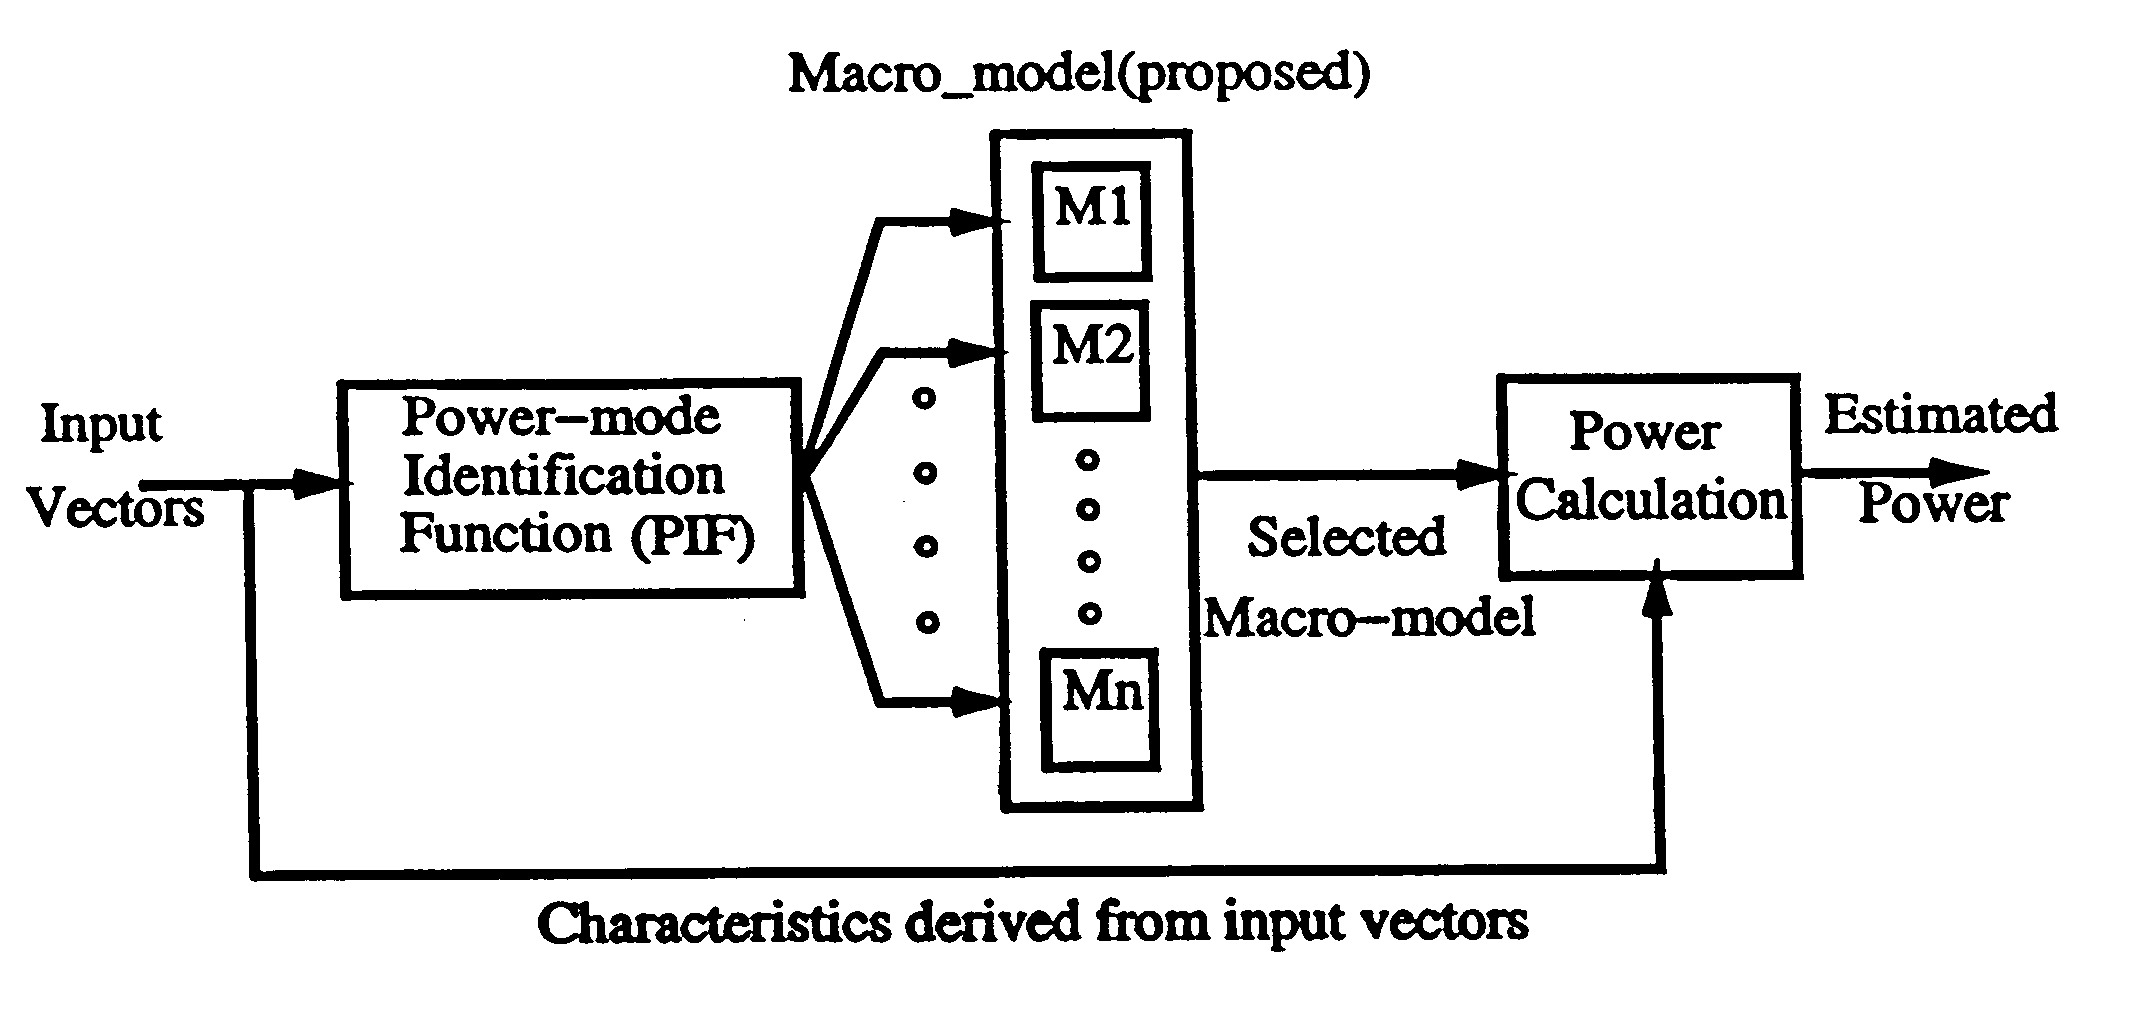 Power mode based macro-models for power estimation of electronic circuits